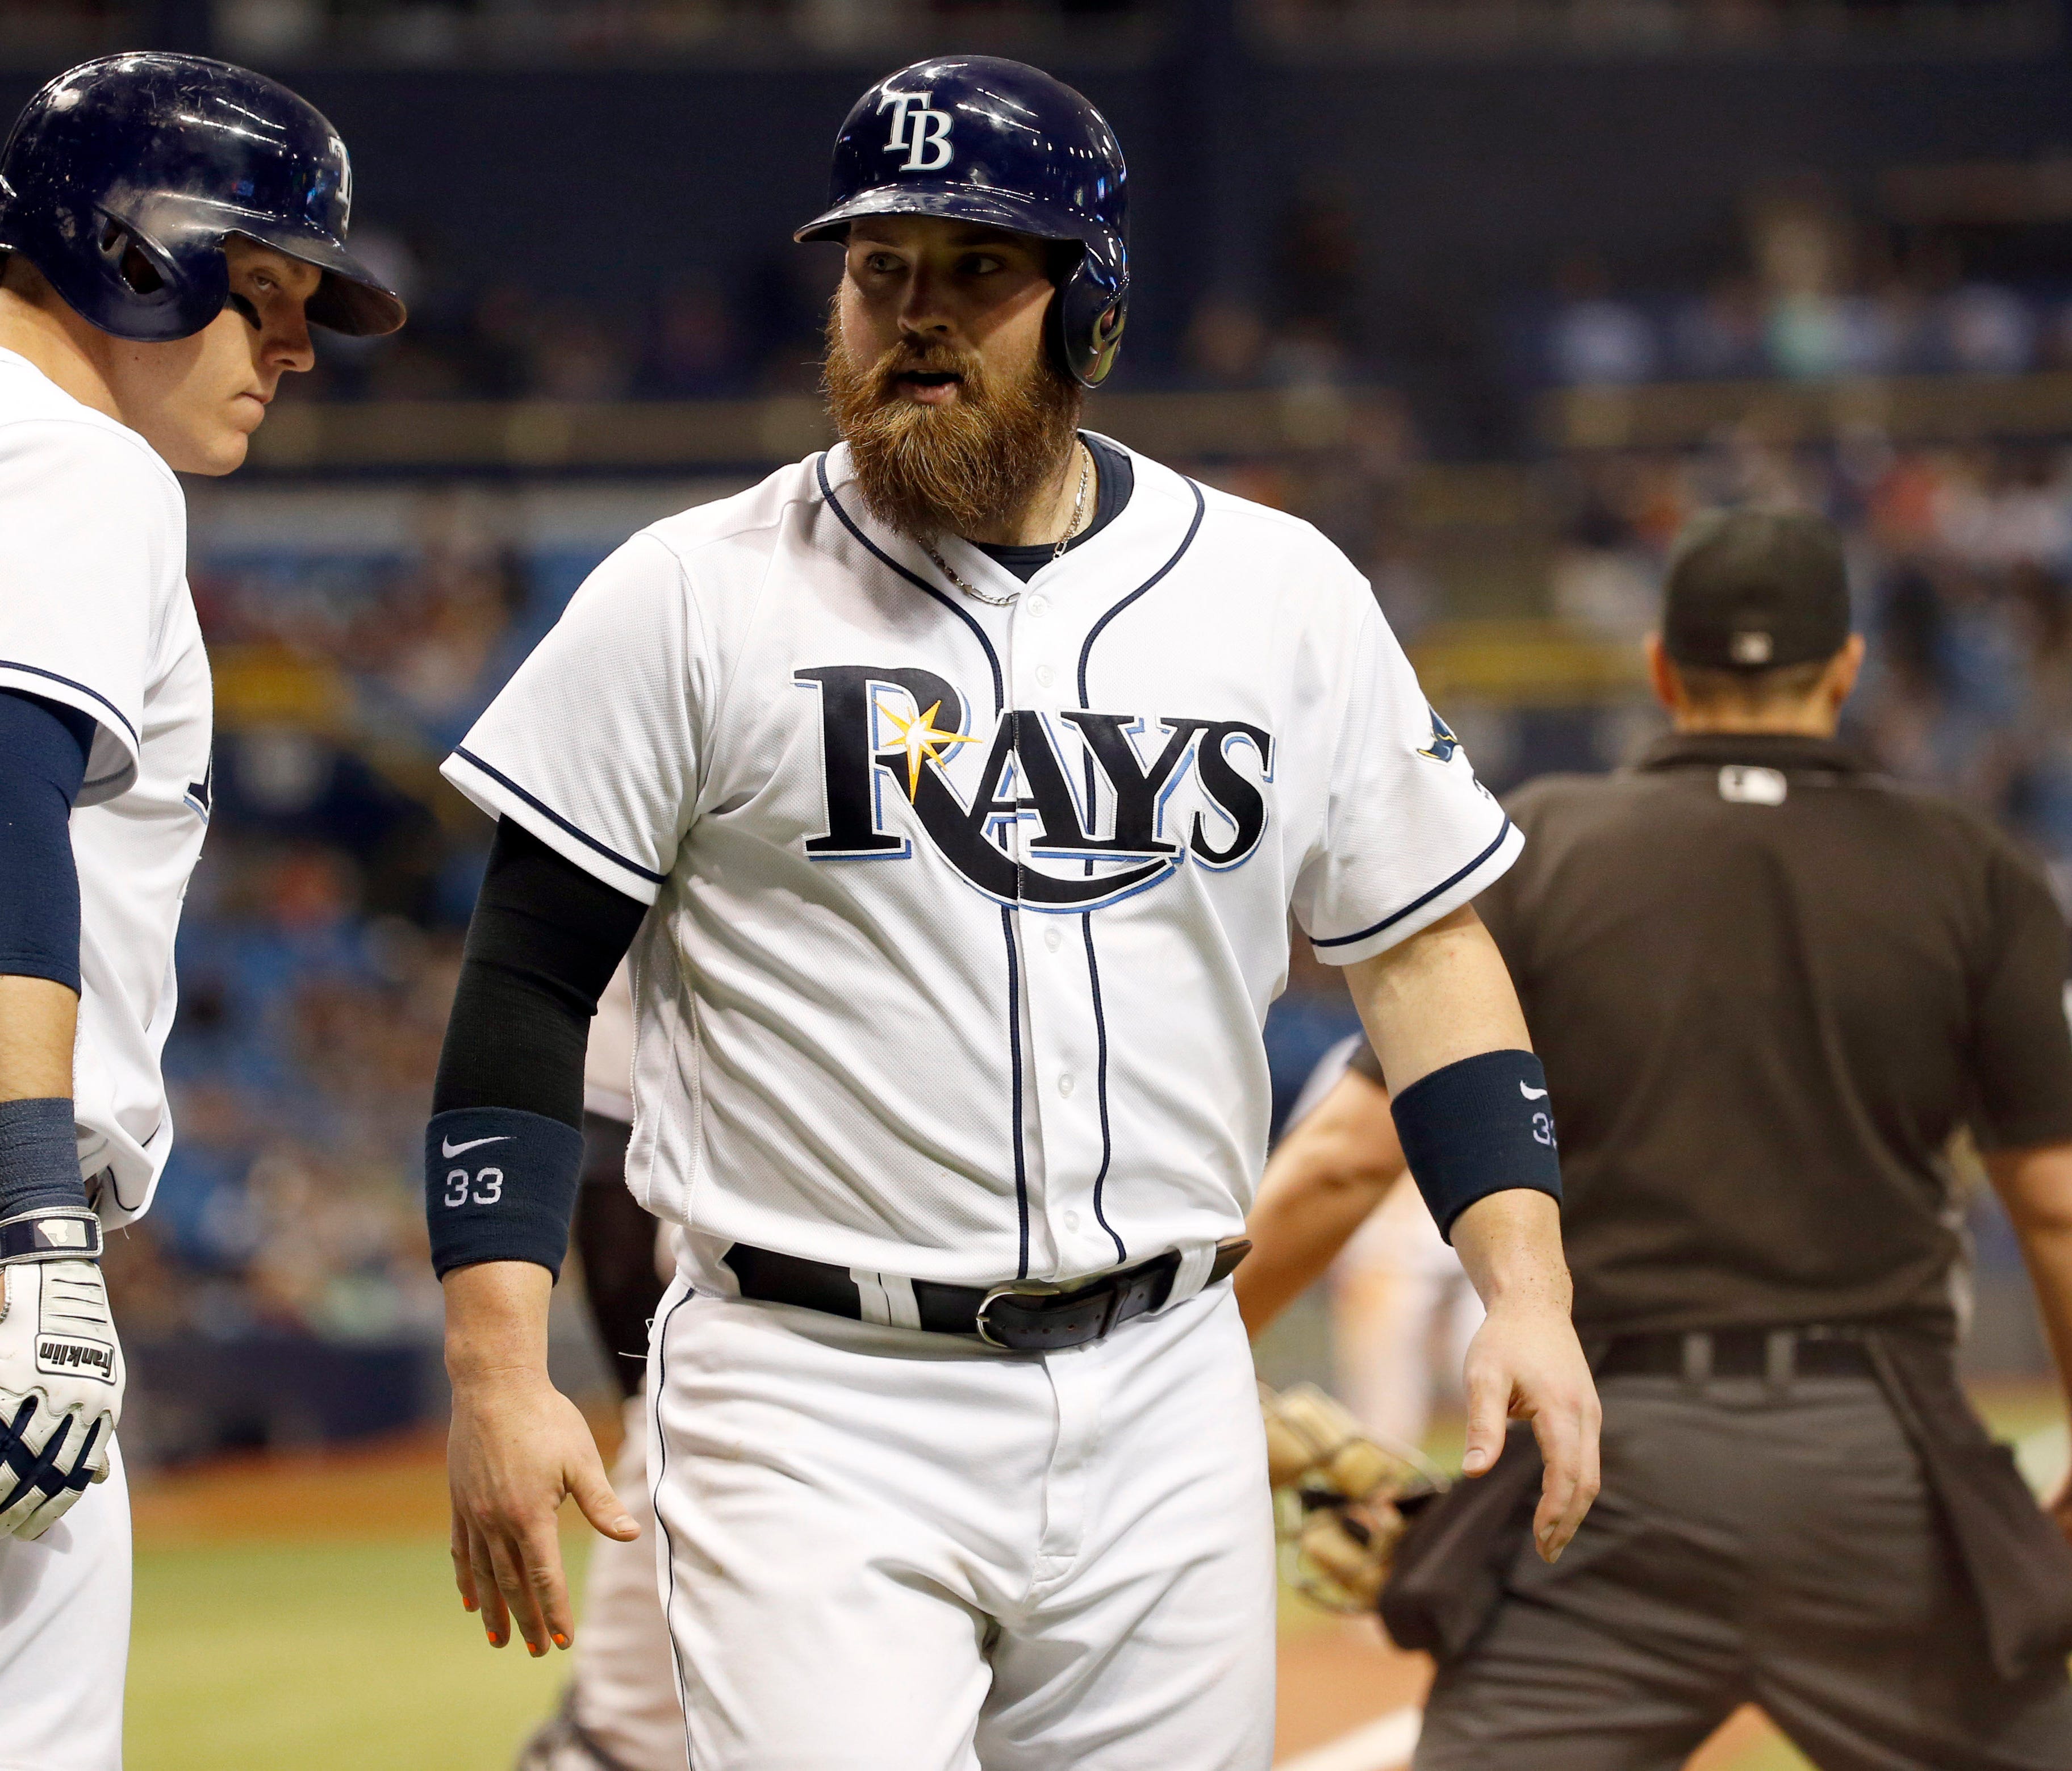 MLB is investigating abuse claims against Rays catcher Derek Norris.